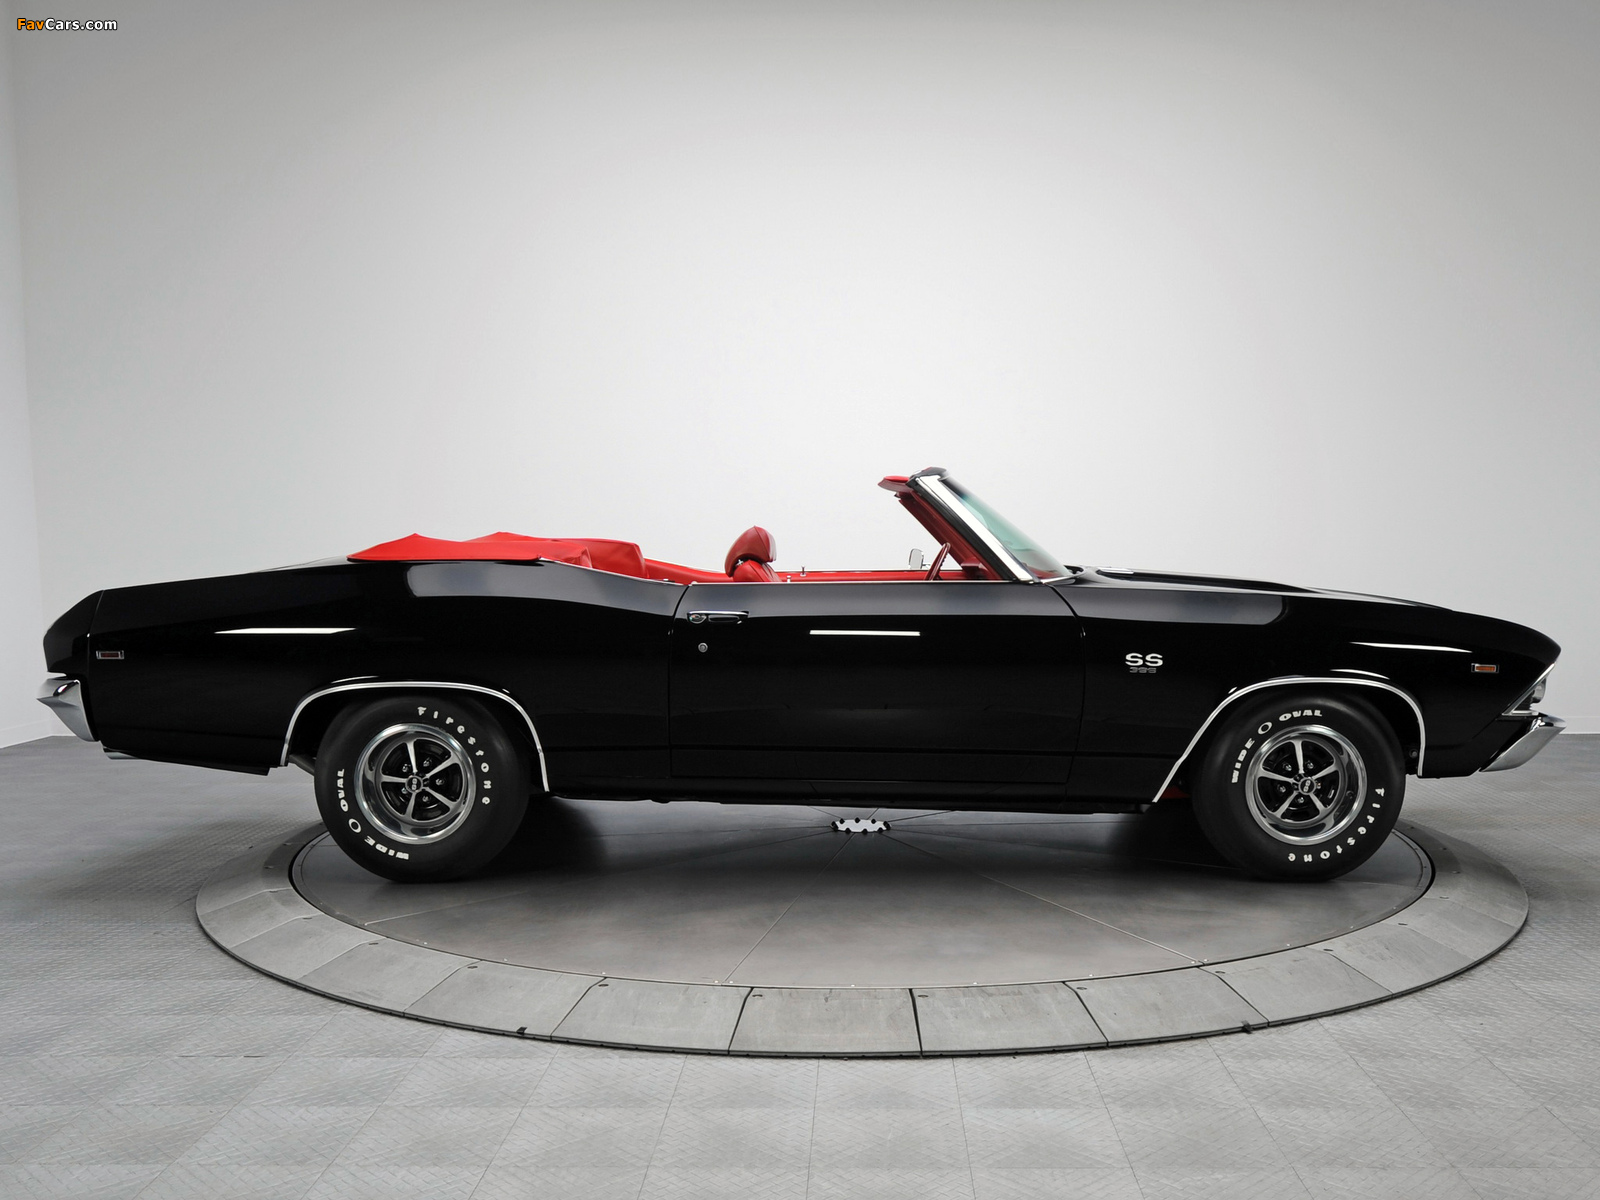 Chevrolet Chevelle SS 396 L35 Convertible 1969 pictures (1600 x 1200)